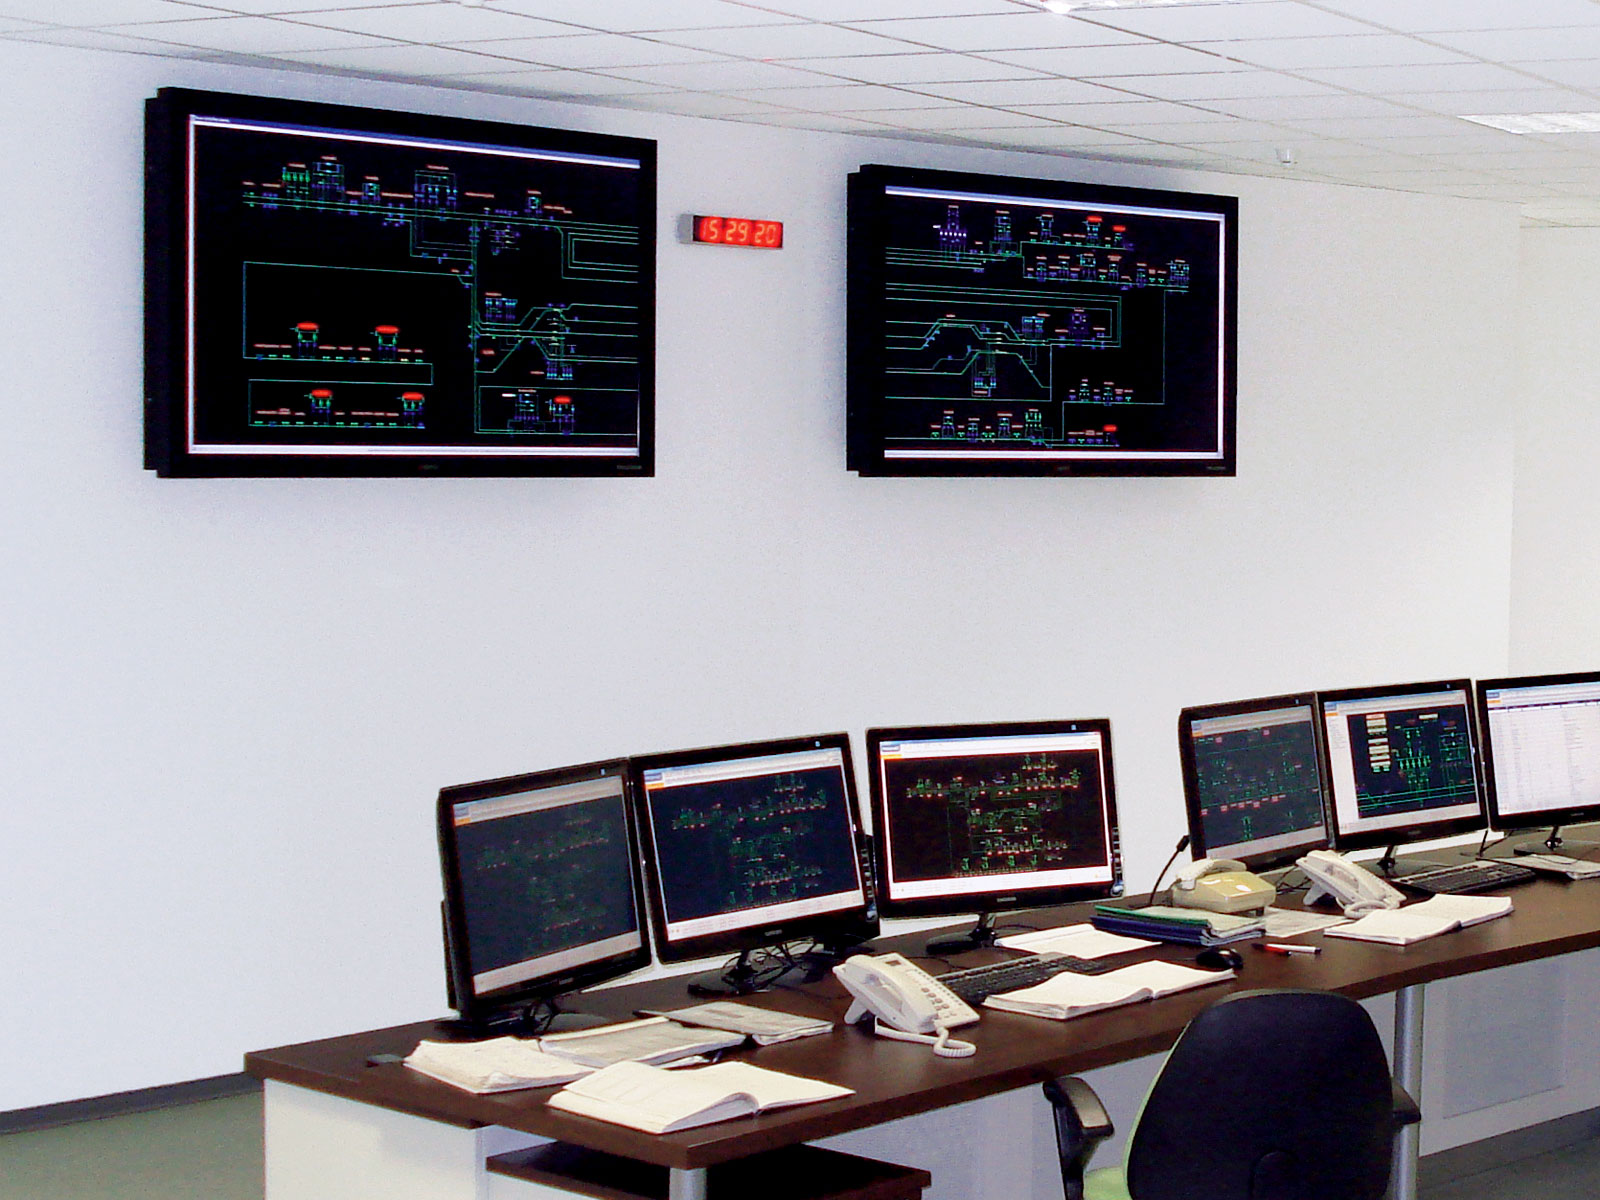 SCADA for non-safety functions